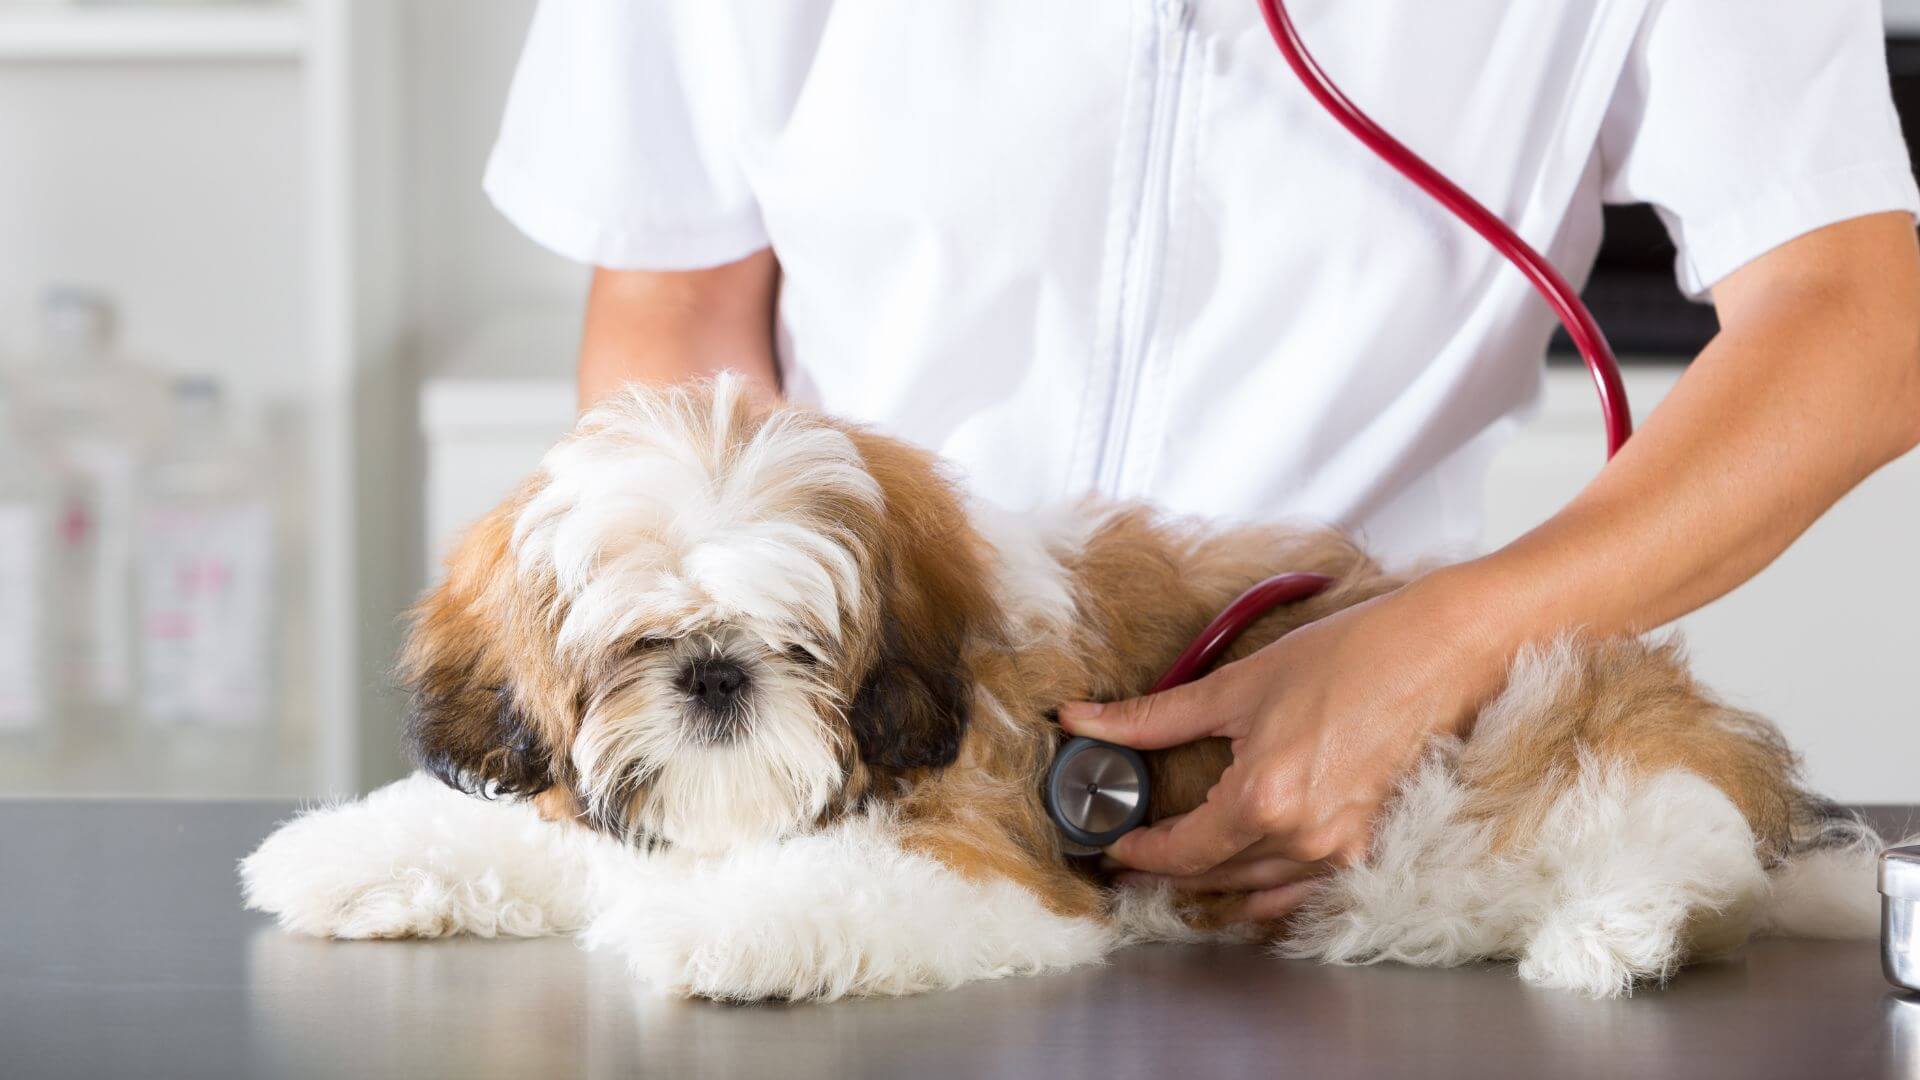 A person using a stethoscope to examine a dog's health condition